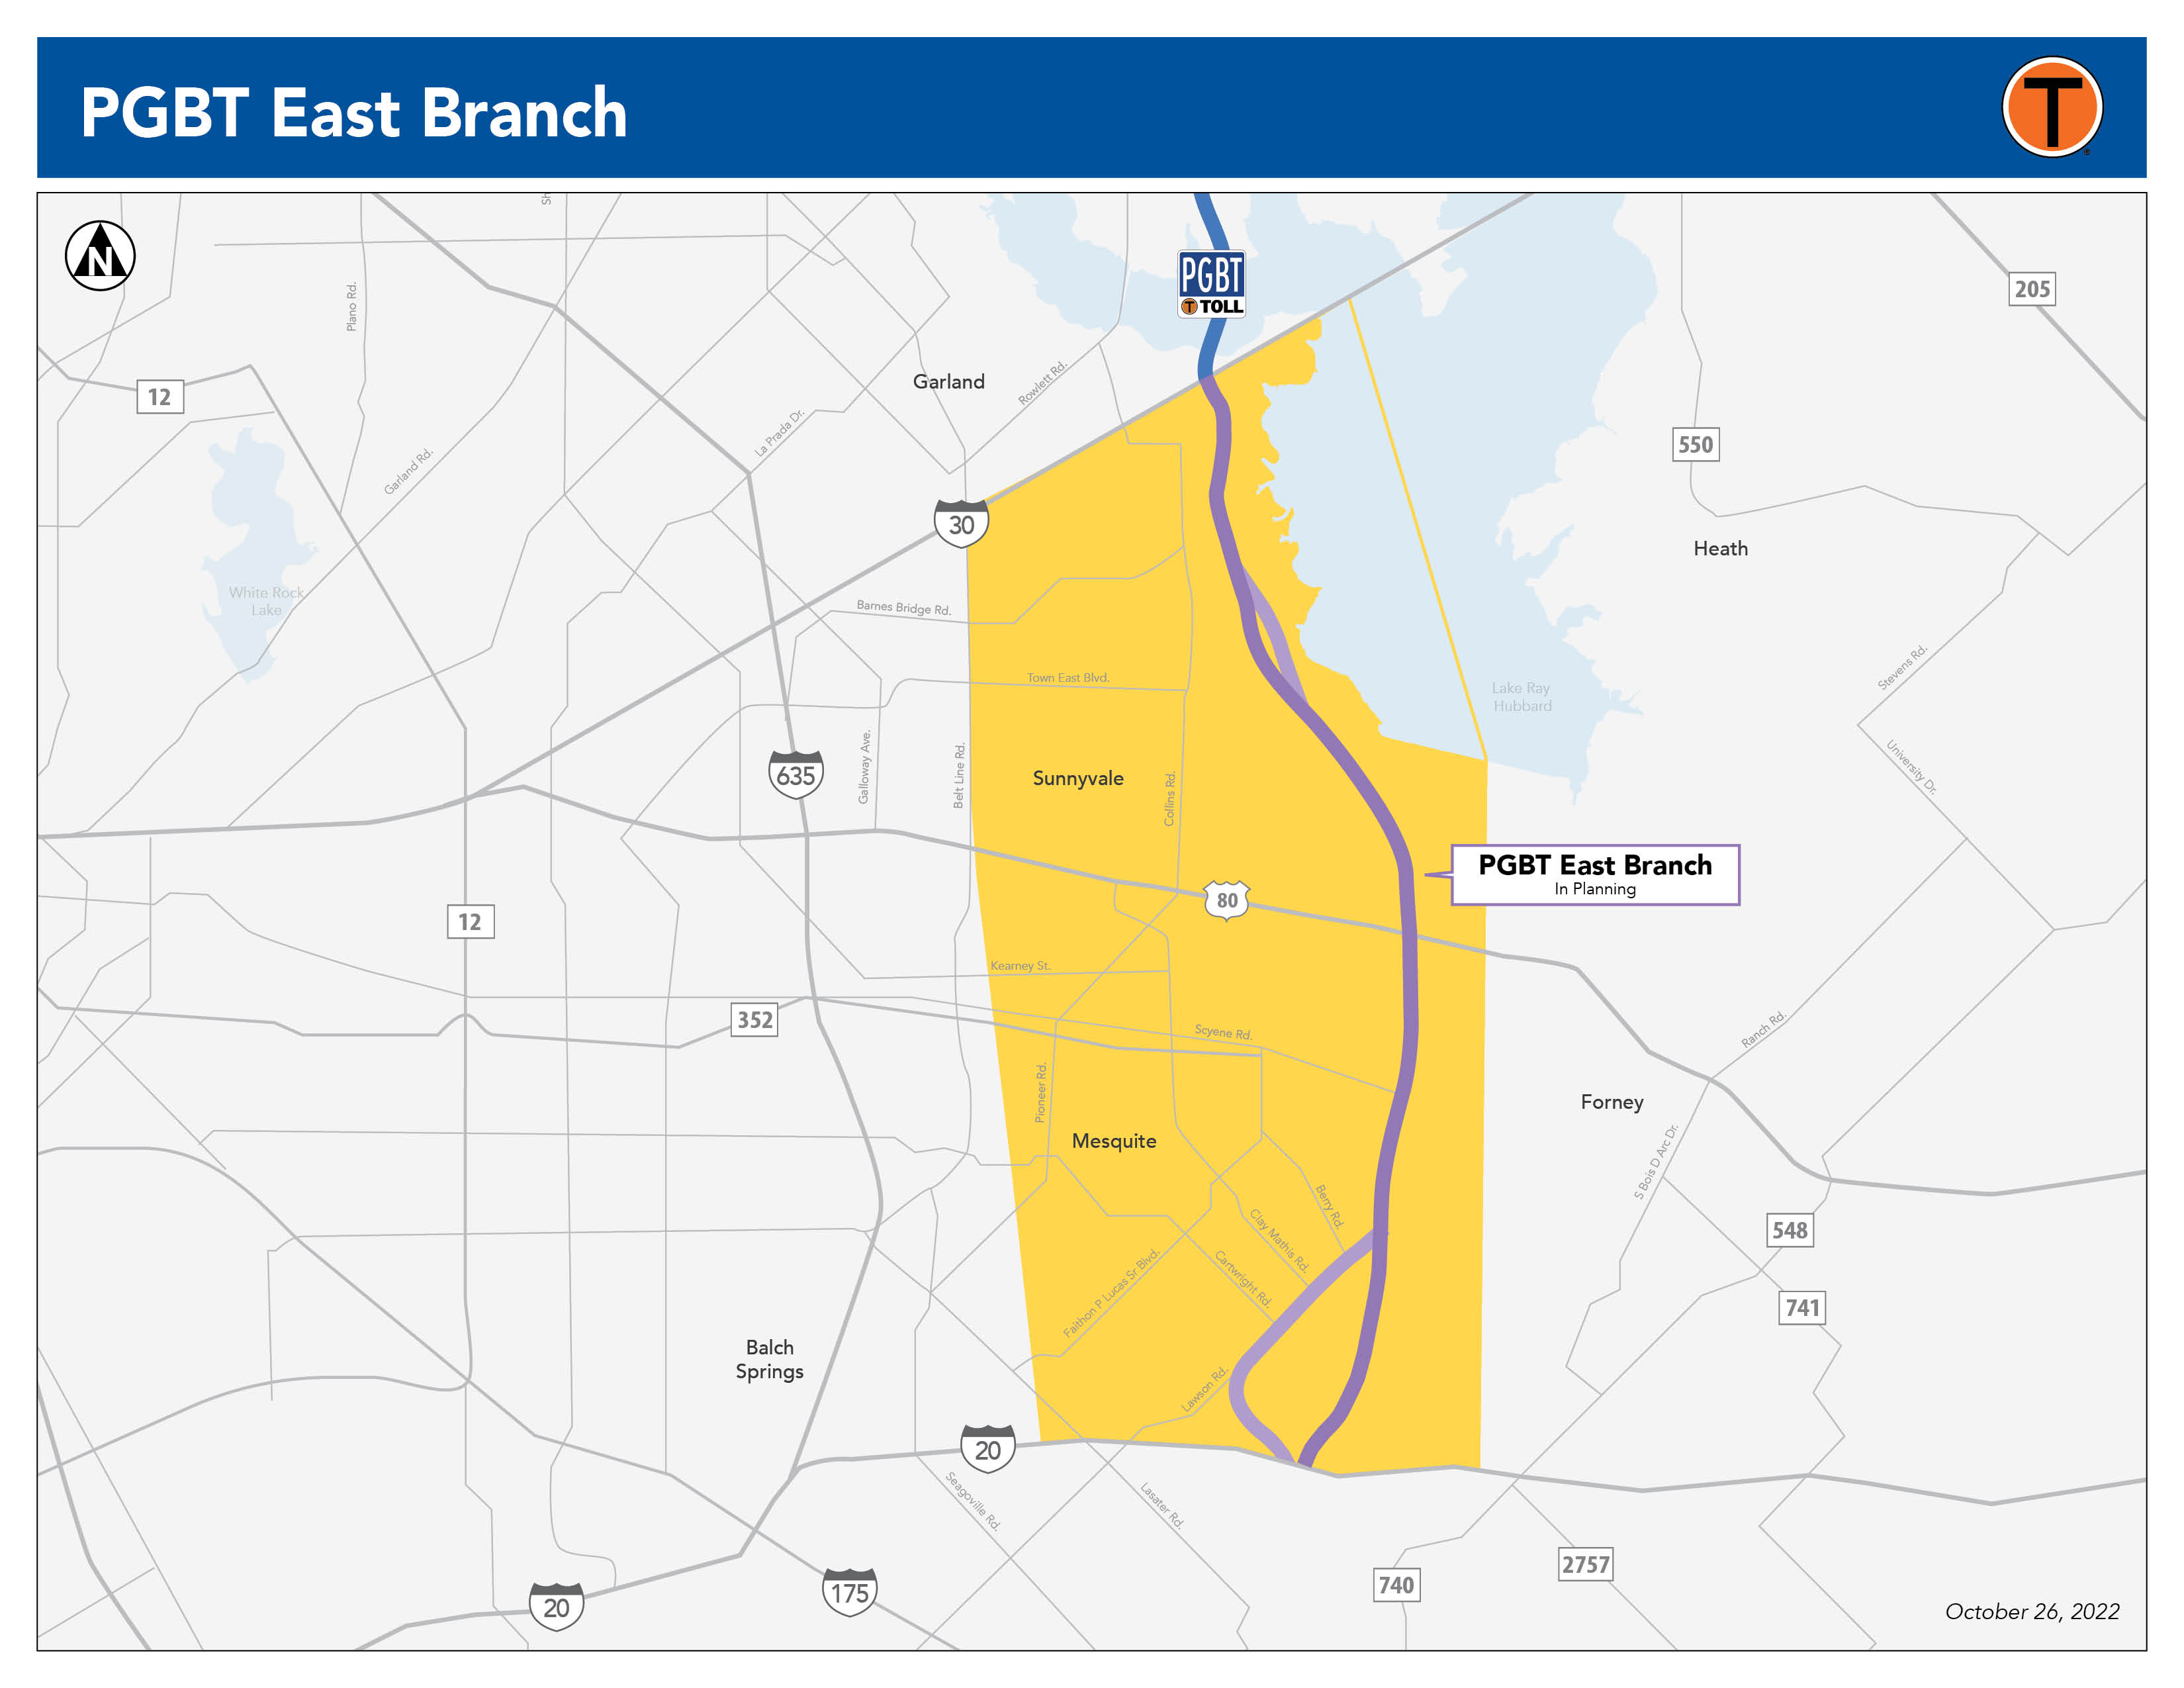 PGBT East Branch Project Map